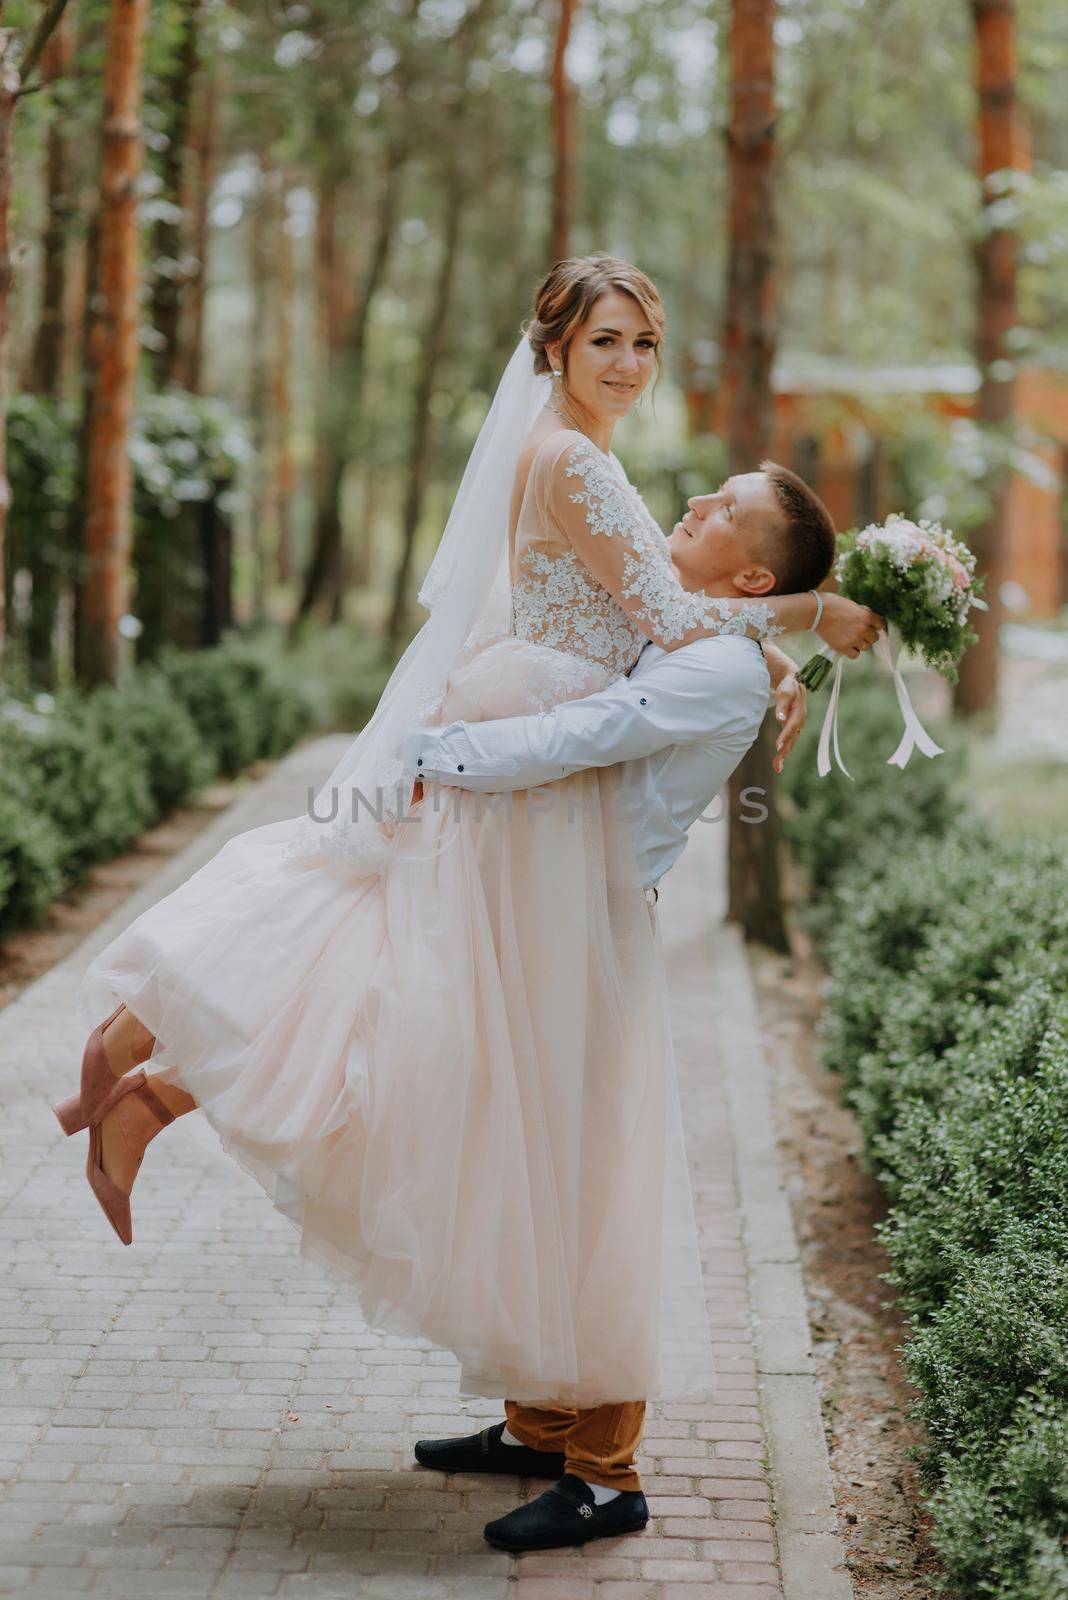 Sensual portrait of a young couple. Wedding photo outdoor. Wedding shot of bride and groom in park. Just married couple embraced. by Andrii_Ko